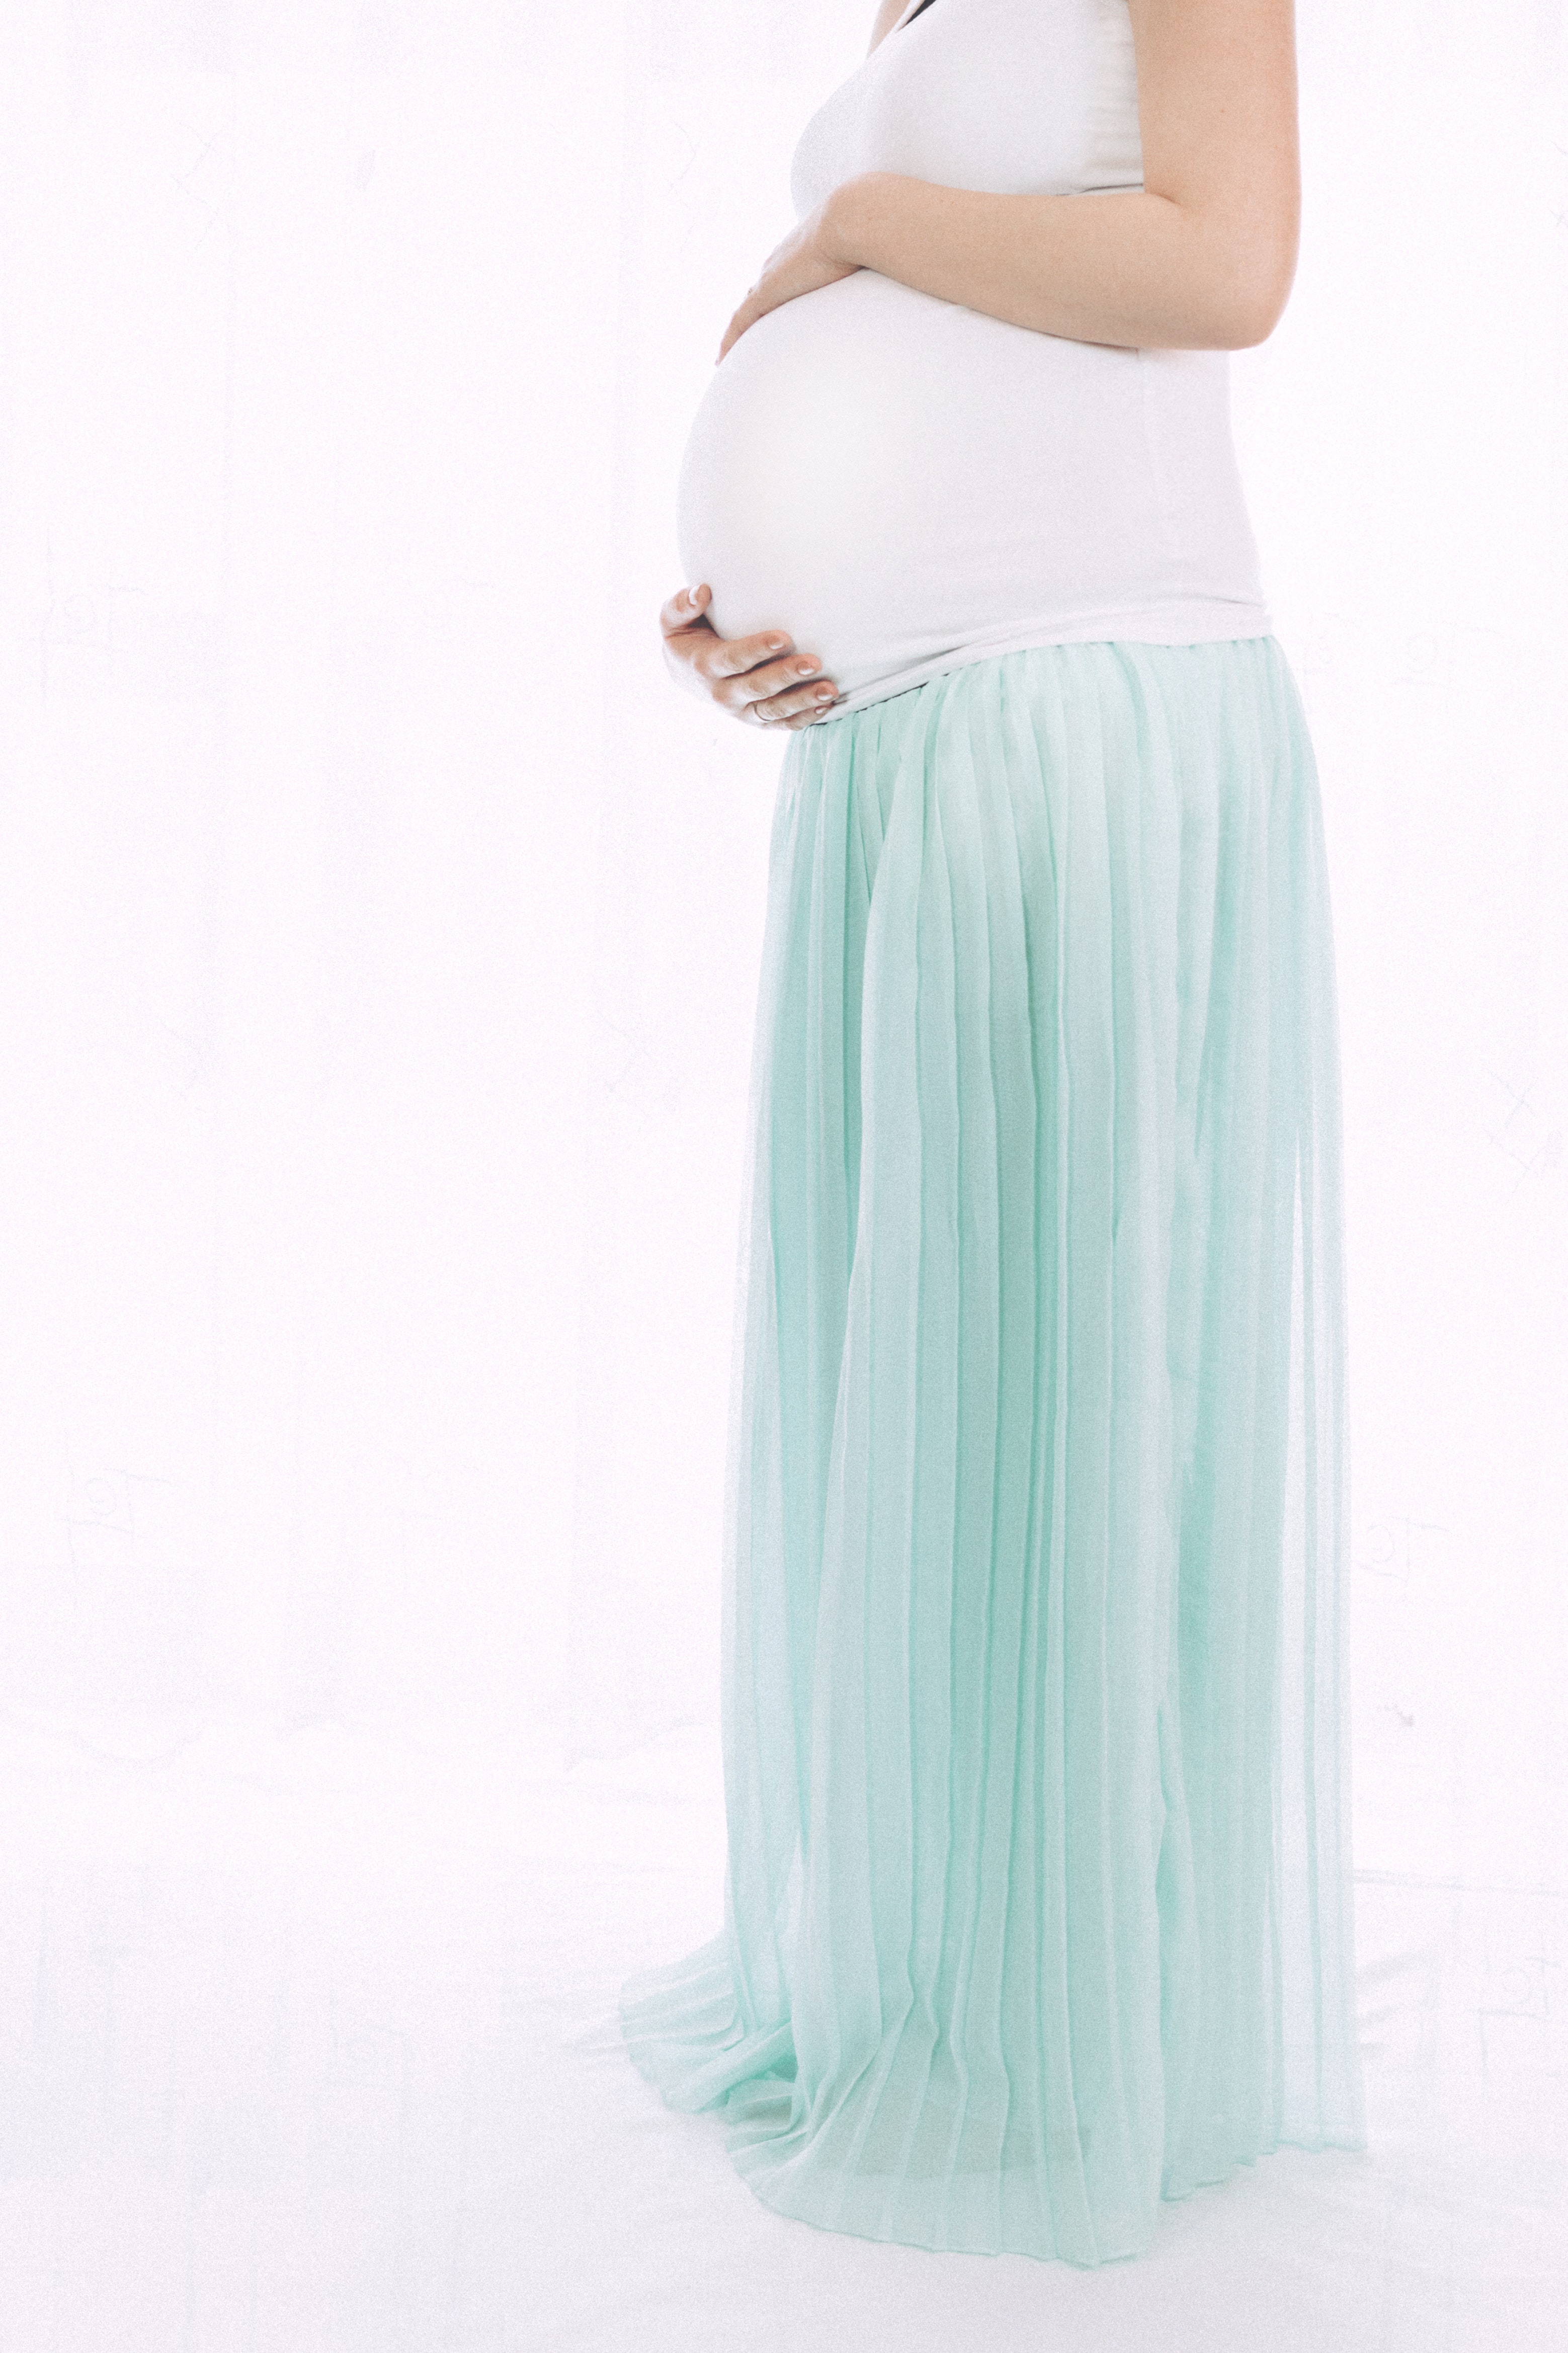 Pregnant woman standing in front of white wall photo